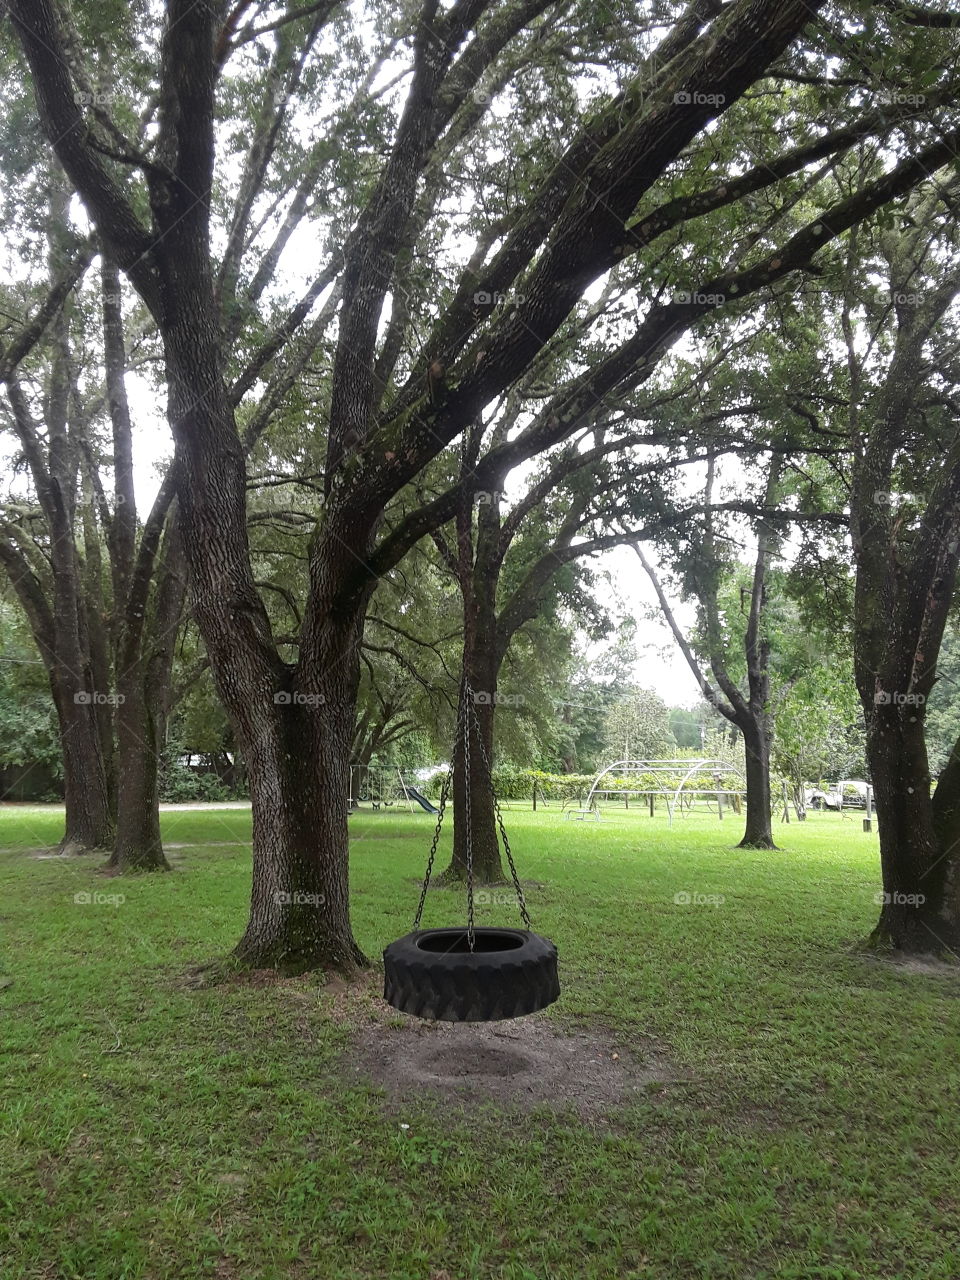 Tire Swing in the country